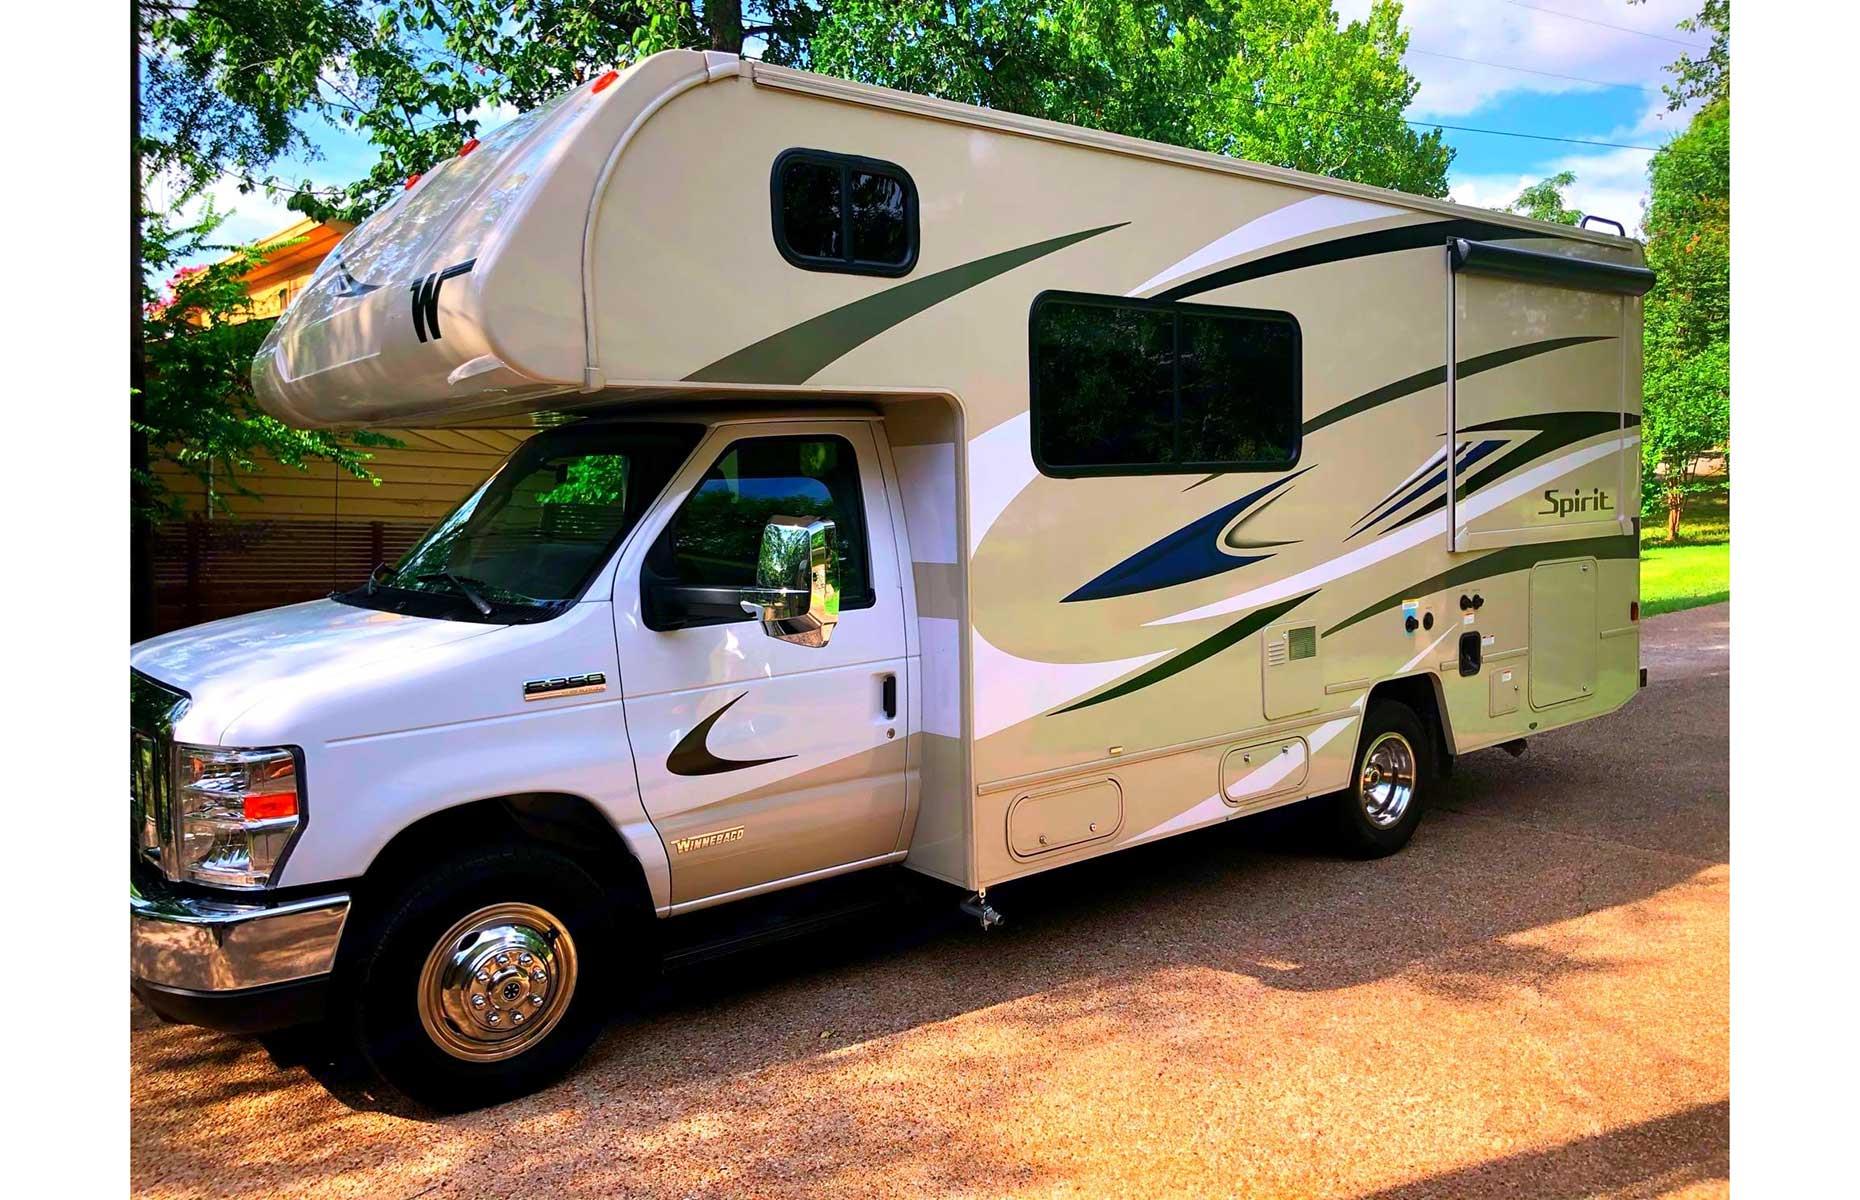 Step aboard the Winnebago Spirit and feel simultaneously relaxed and excited for your adventure on wheels. The Class C motorhome has minimalist decor with hanging woven baskets and vinyl flooring and certainly has that home-away-from-home feel. Measuring 24 feet (7.3m) long, this RV can sleep up to four passengers.